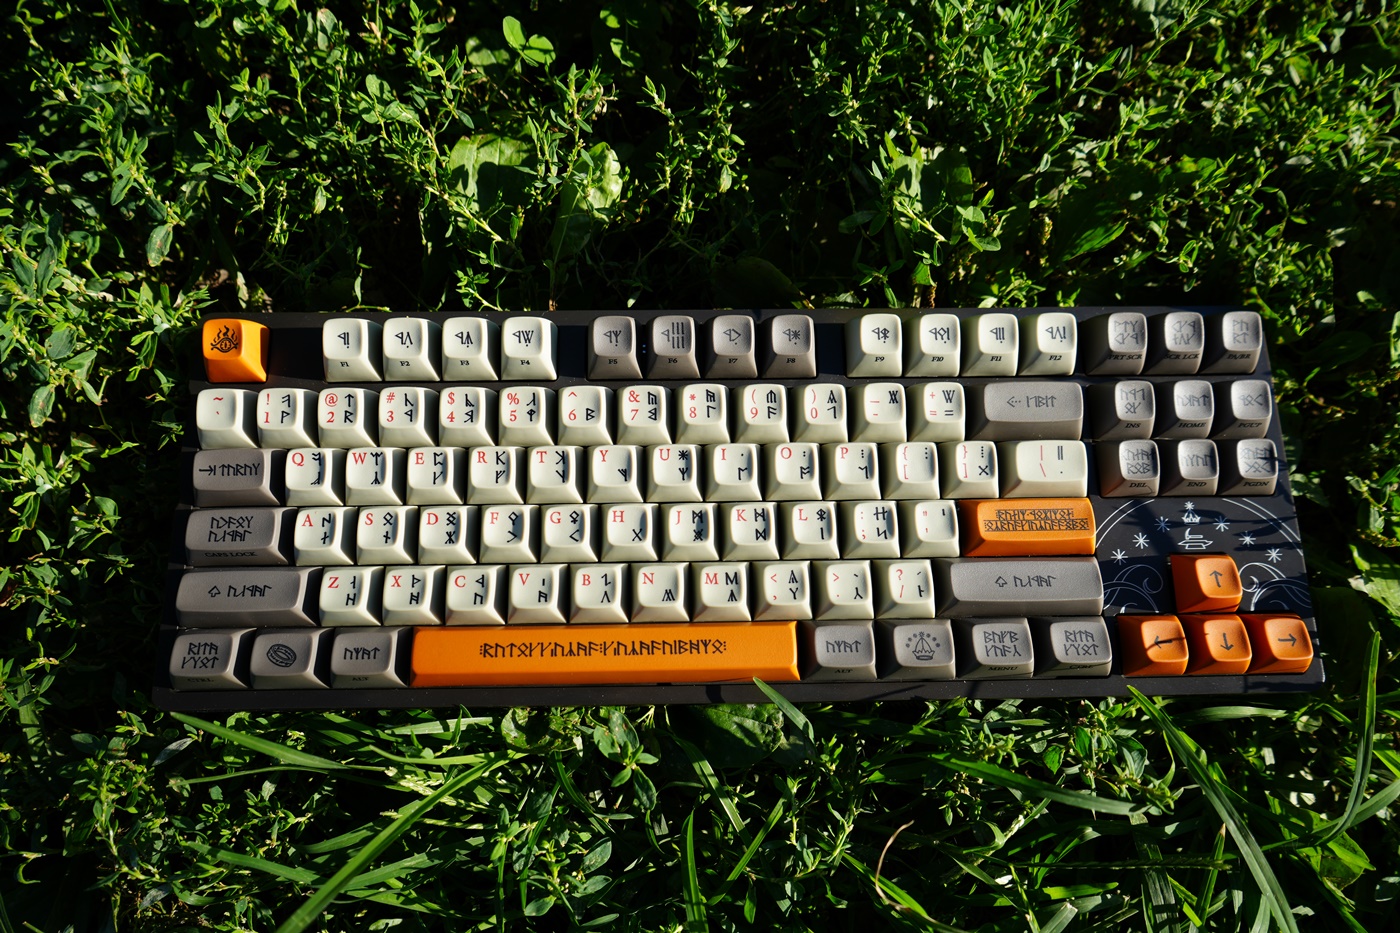 Dwarvish Keyboard Lord of the Rings on grass